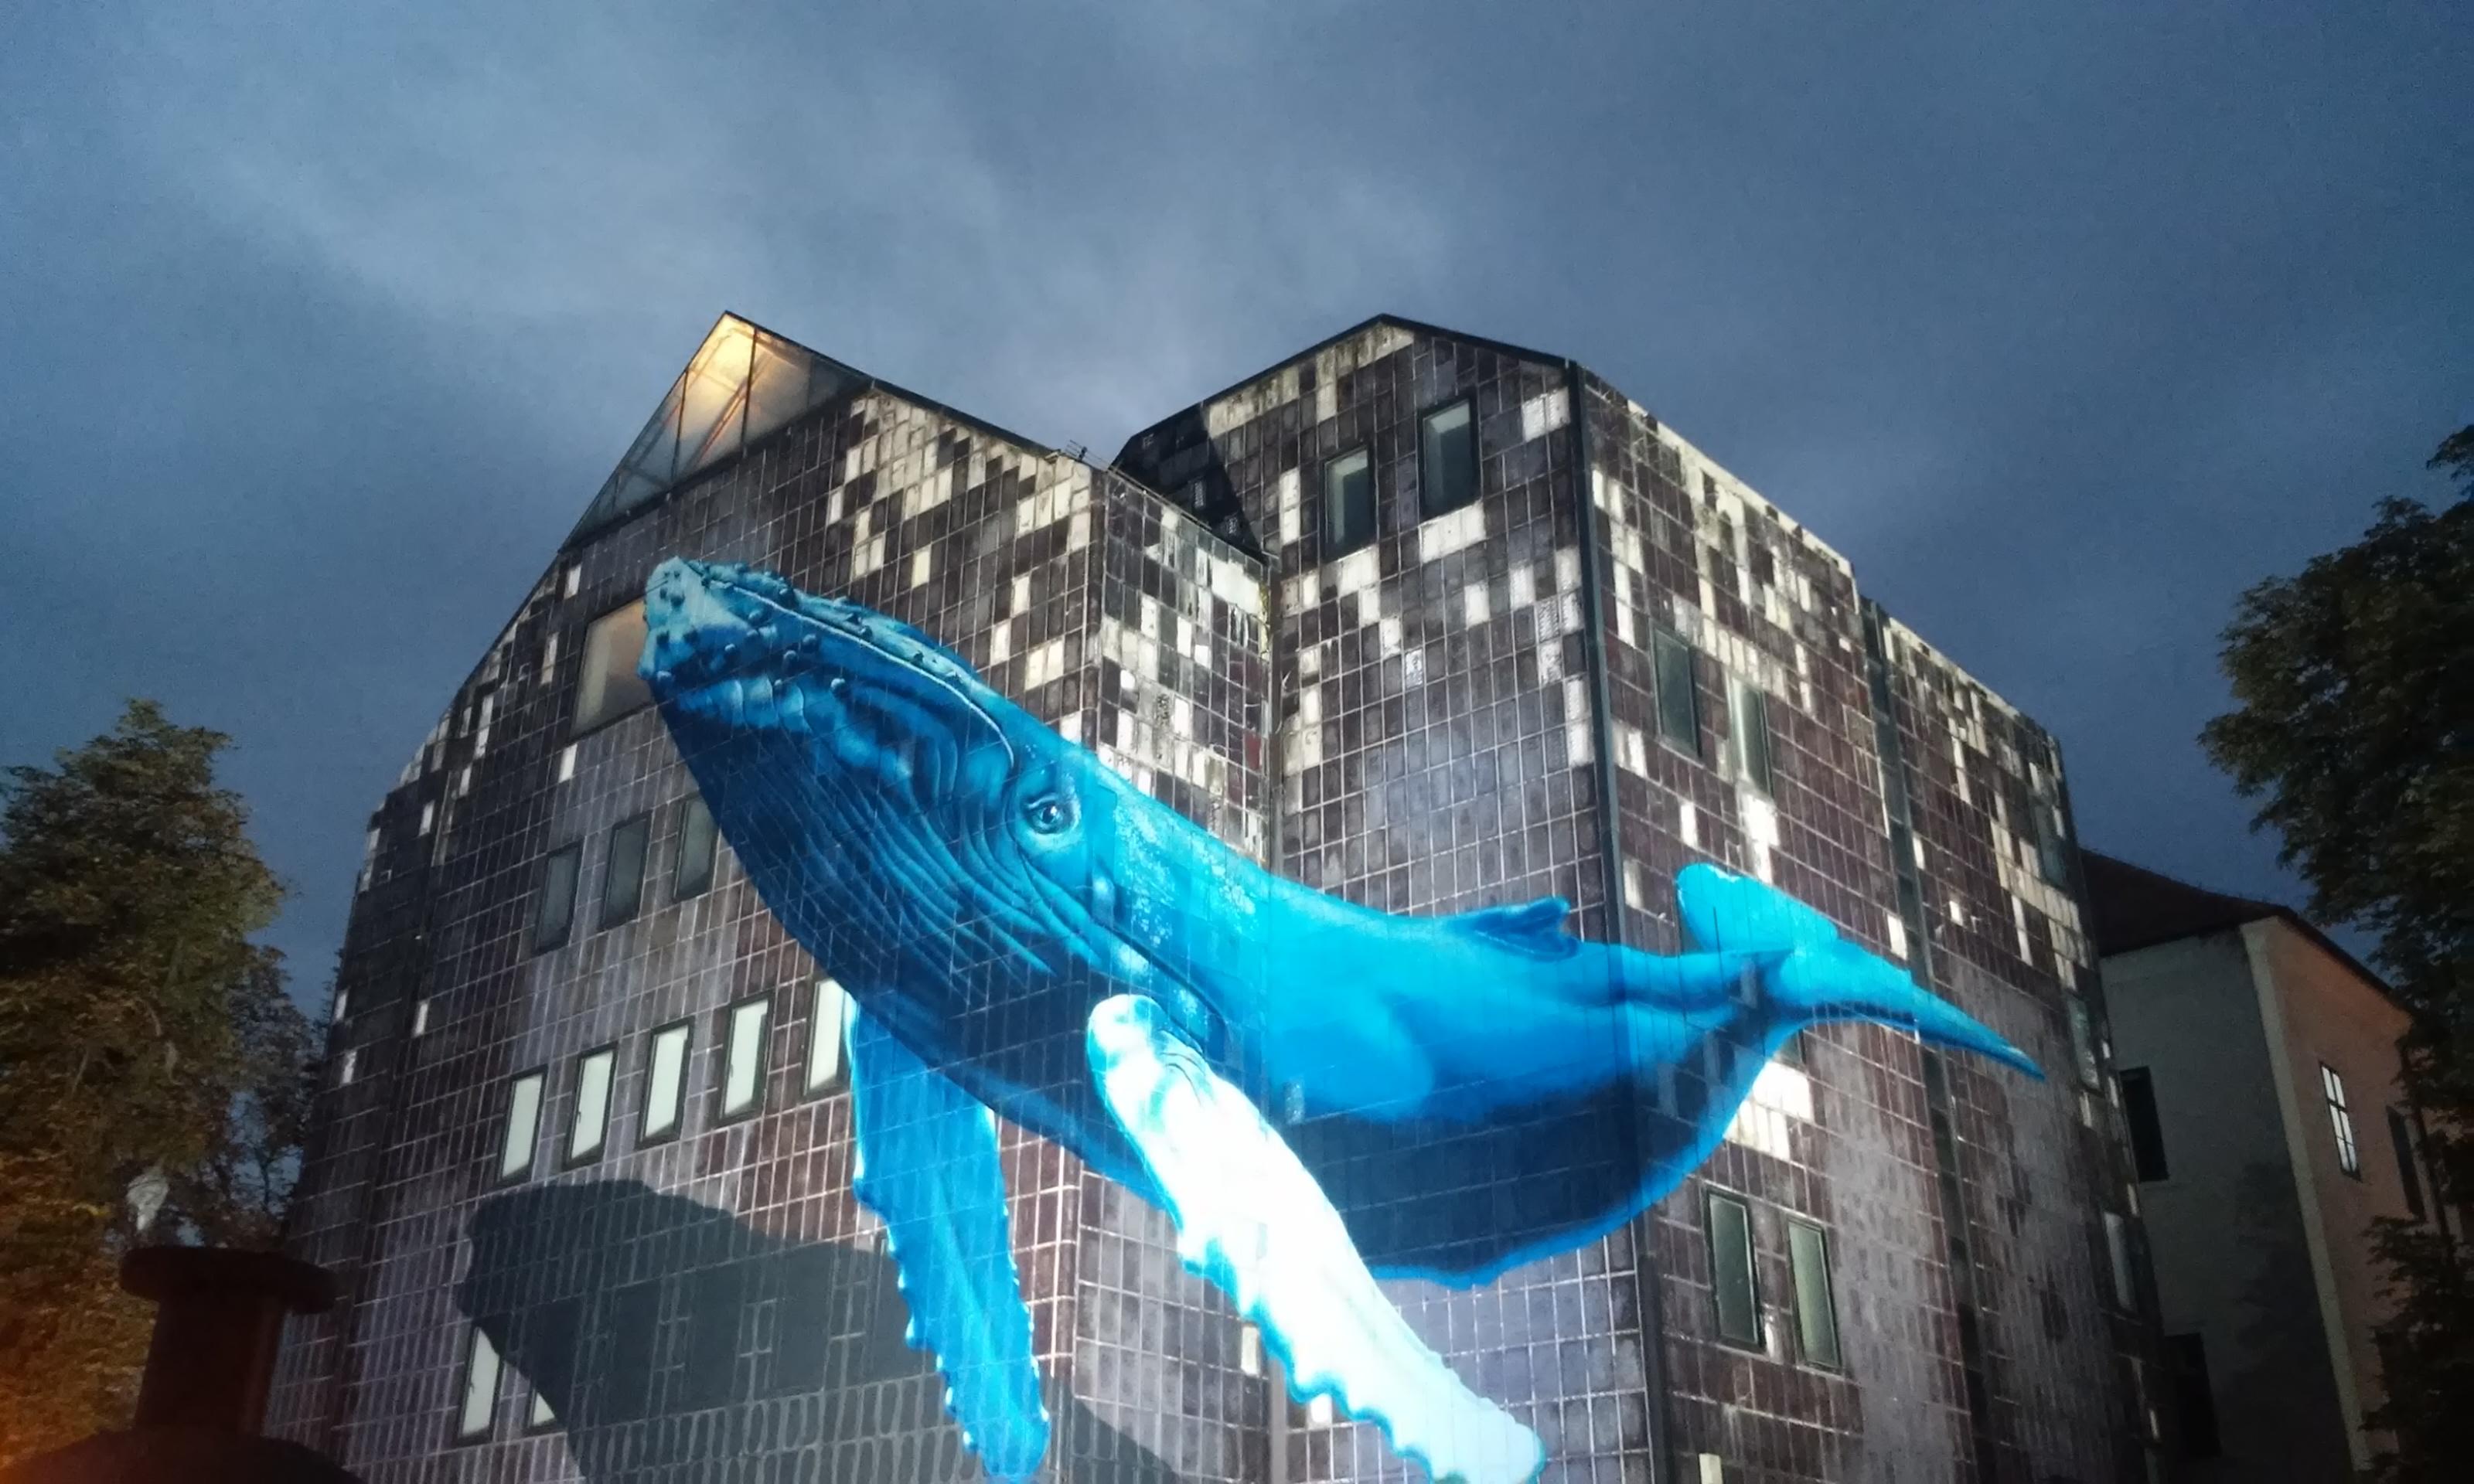 Cover image of this place Giant Whale Mural